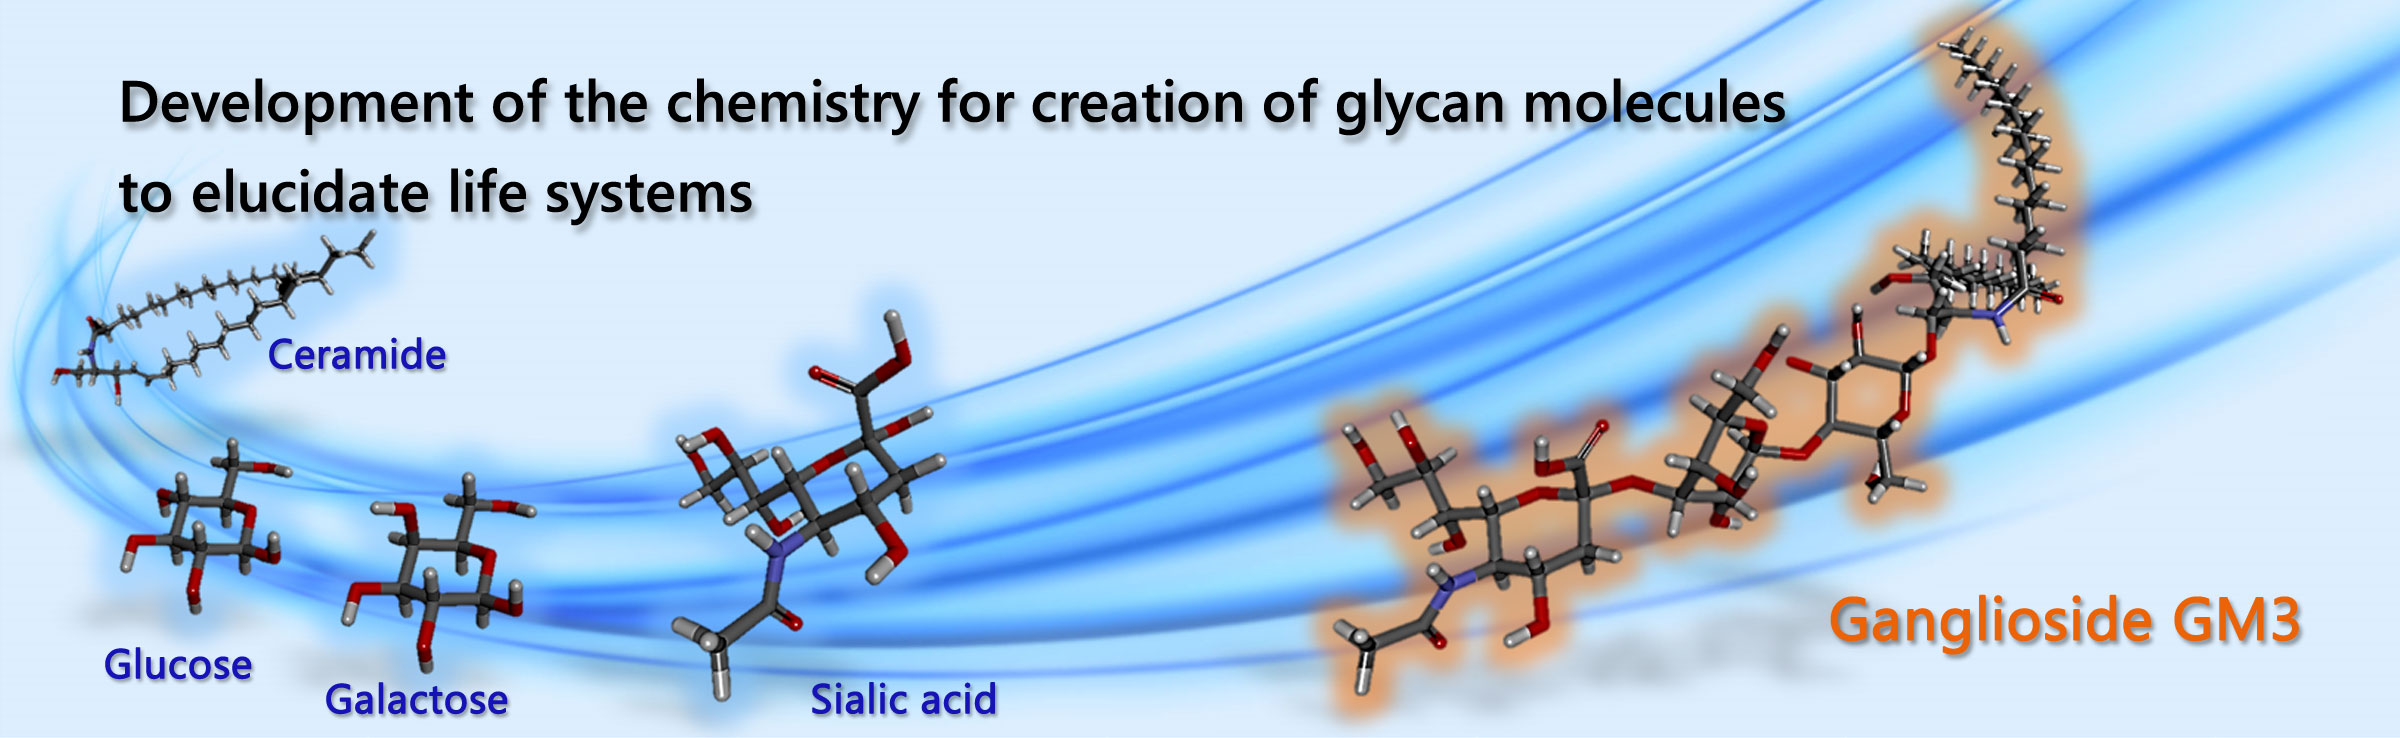 Development of the chemistry for creation of glycan molecules to elucidate life systems